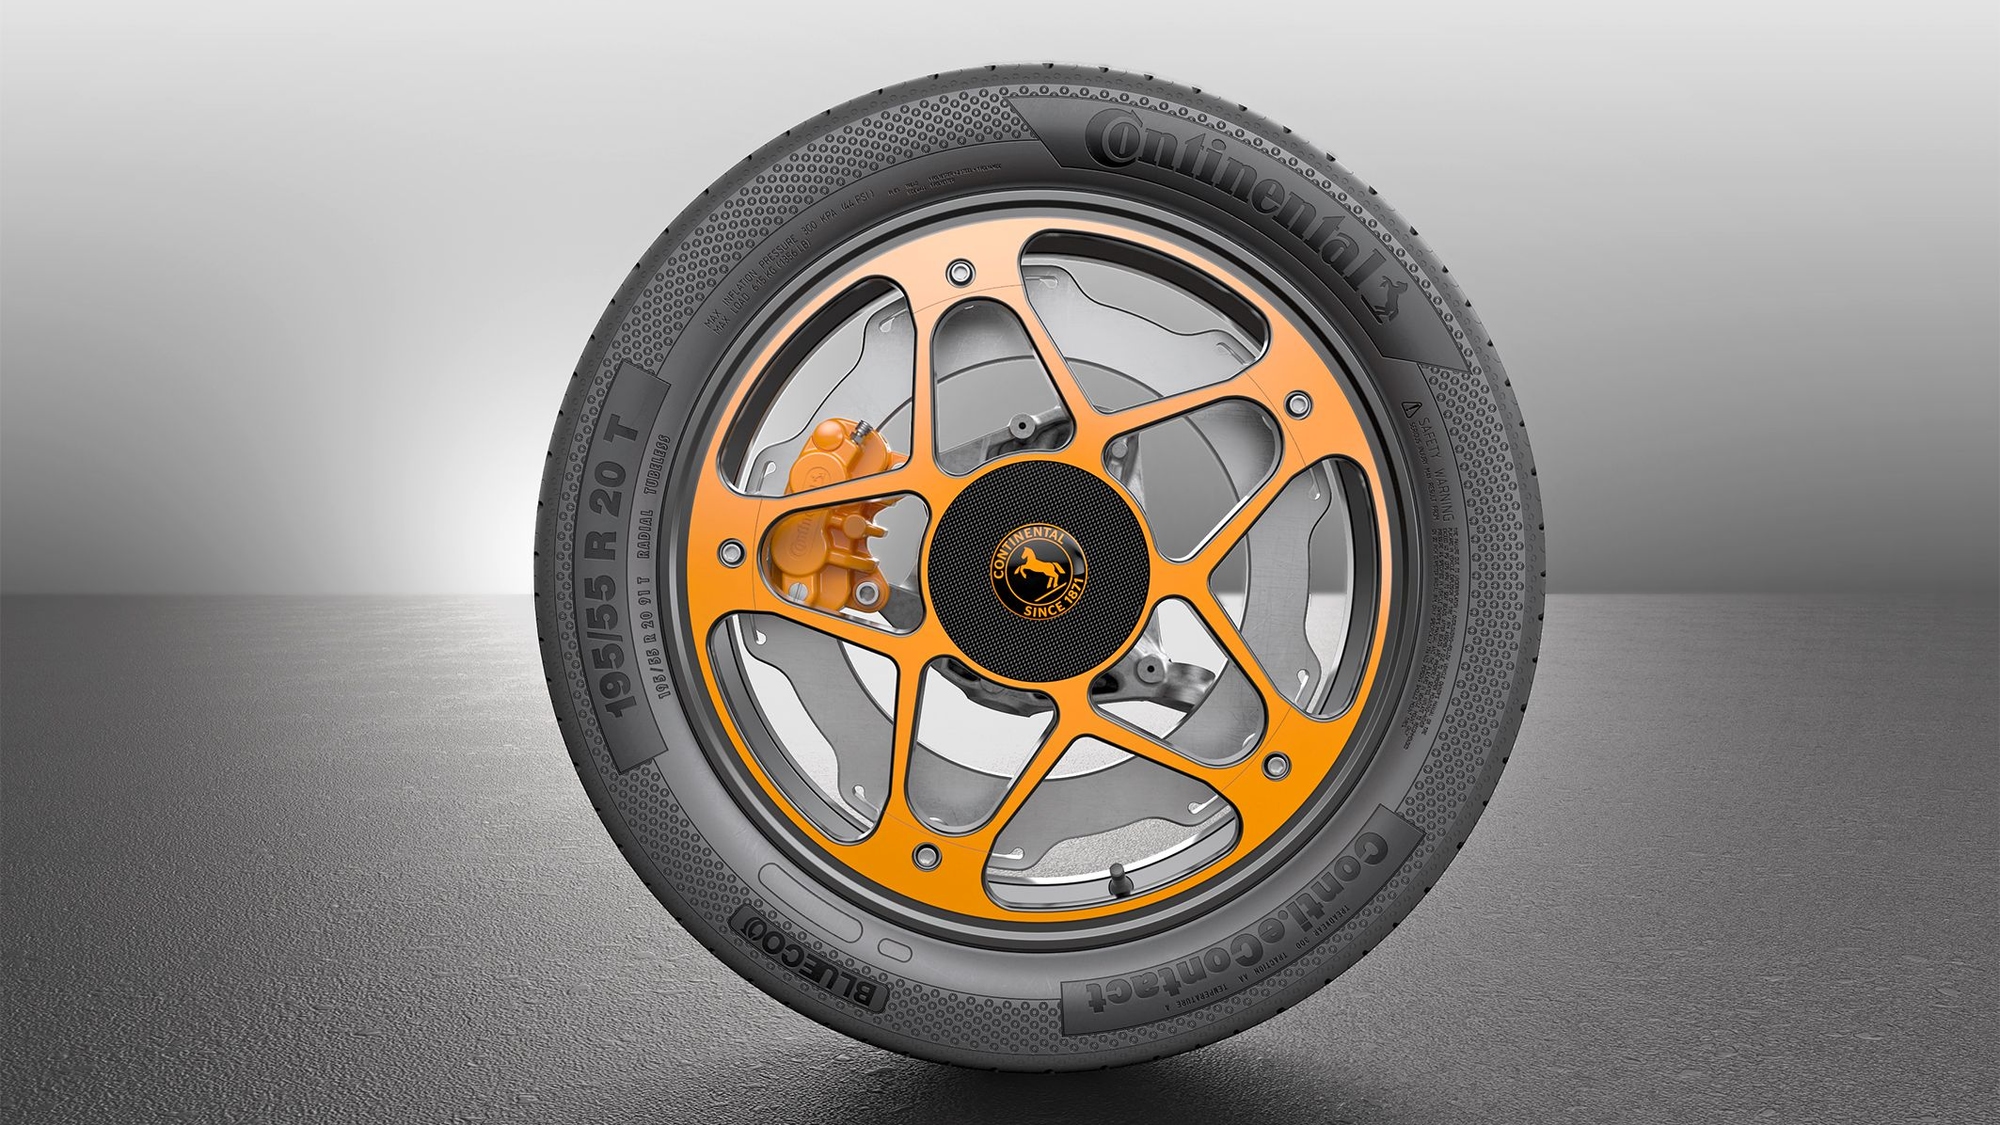 Continental wheel and brake concept